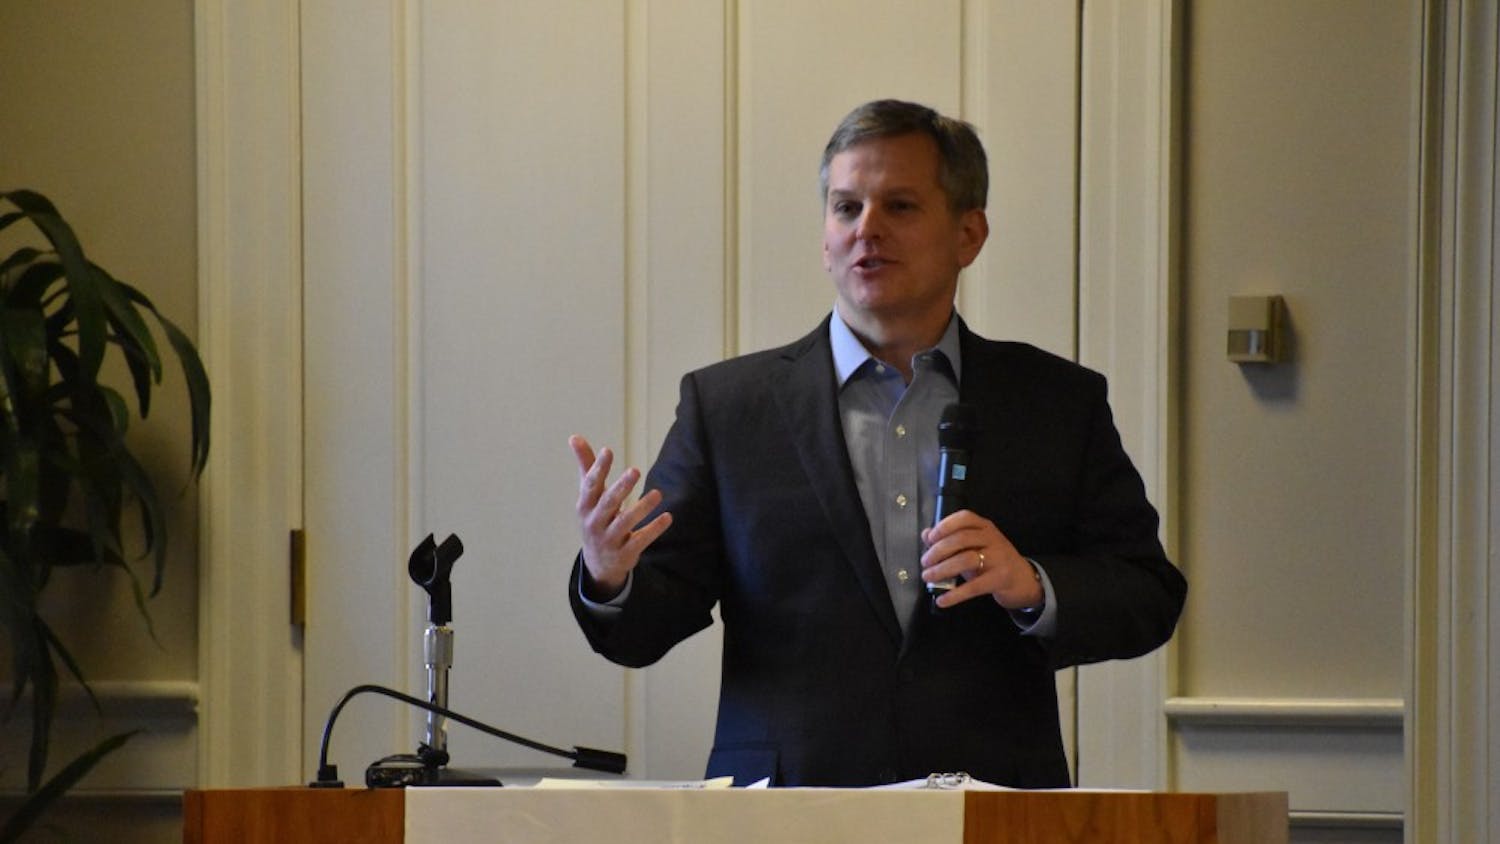 North Carolina Attorney General Josh Stein delivers a talk at UNC on Thursday afternoon about problems that affect college campuses.&nbsp;